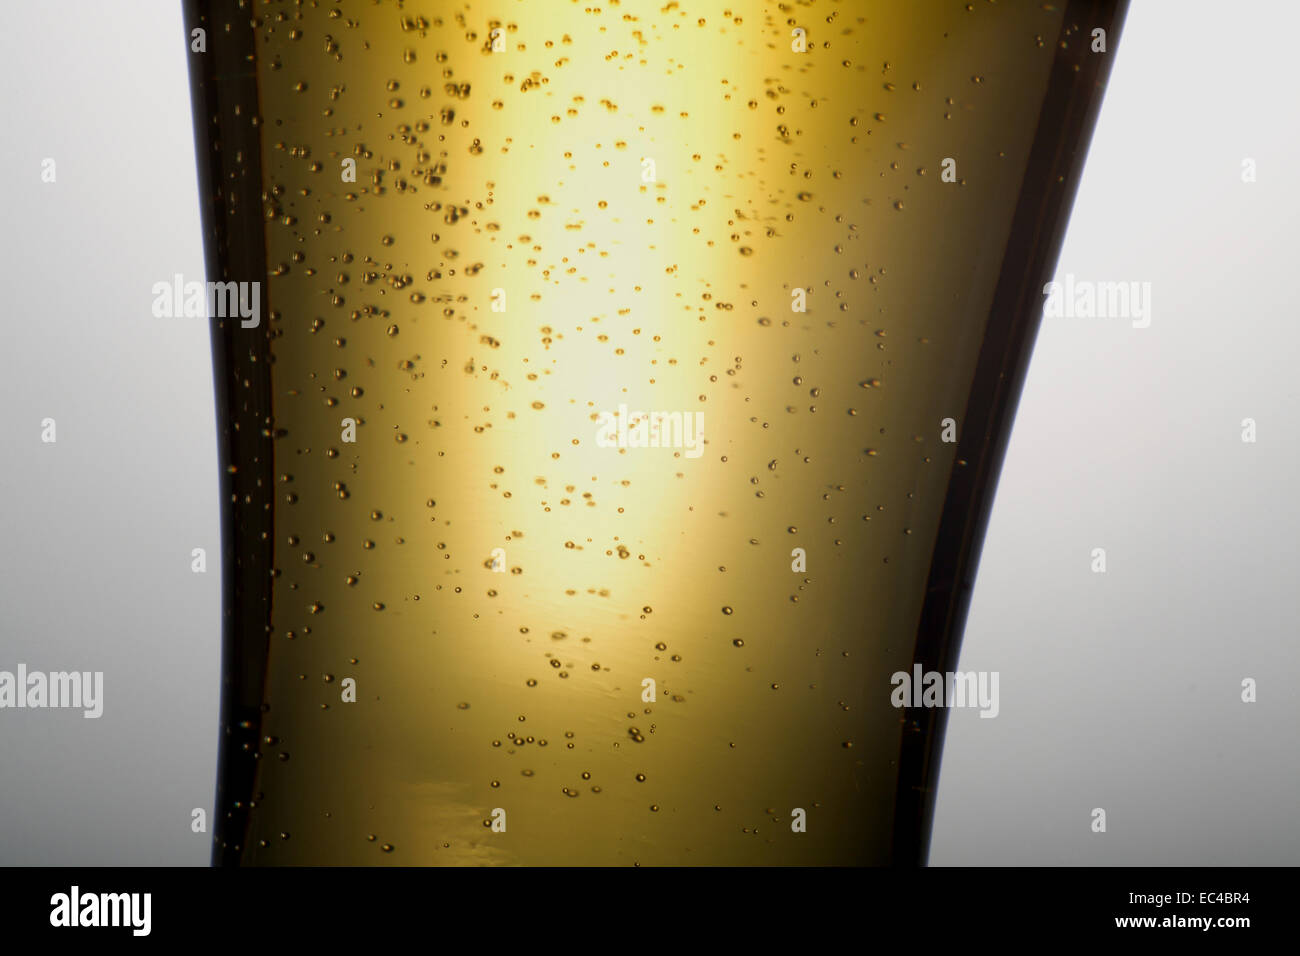 filled beer glass Stock Photo